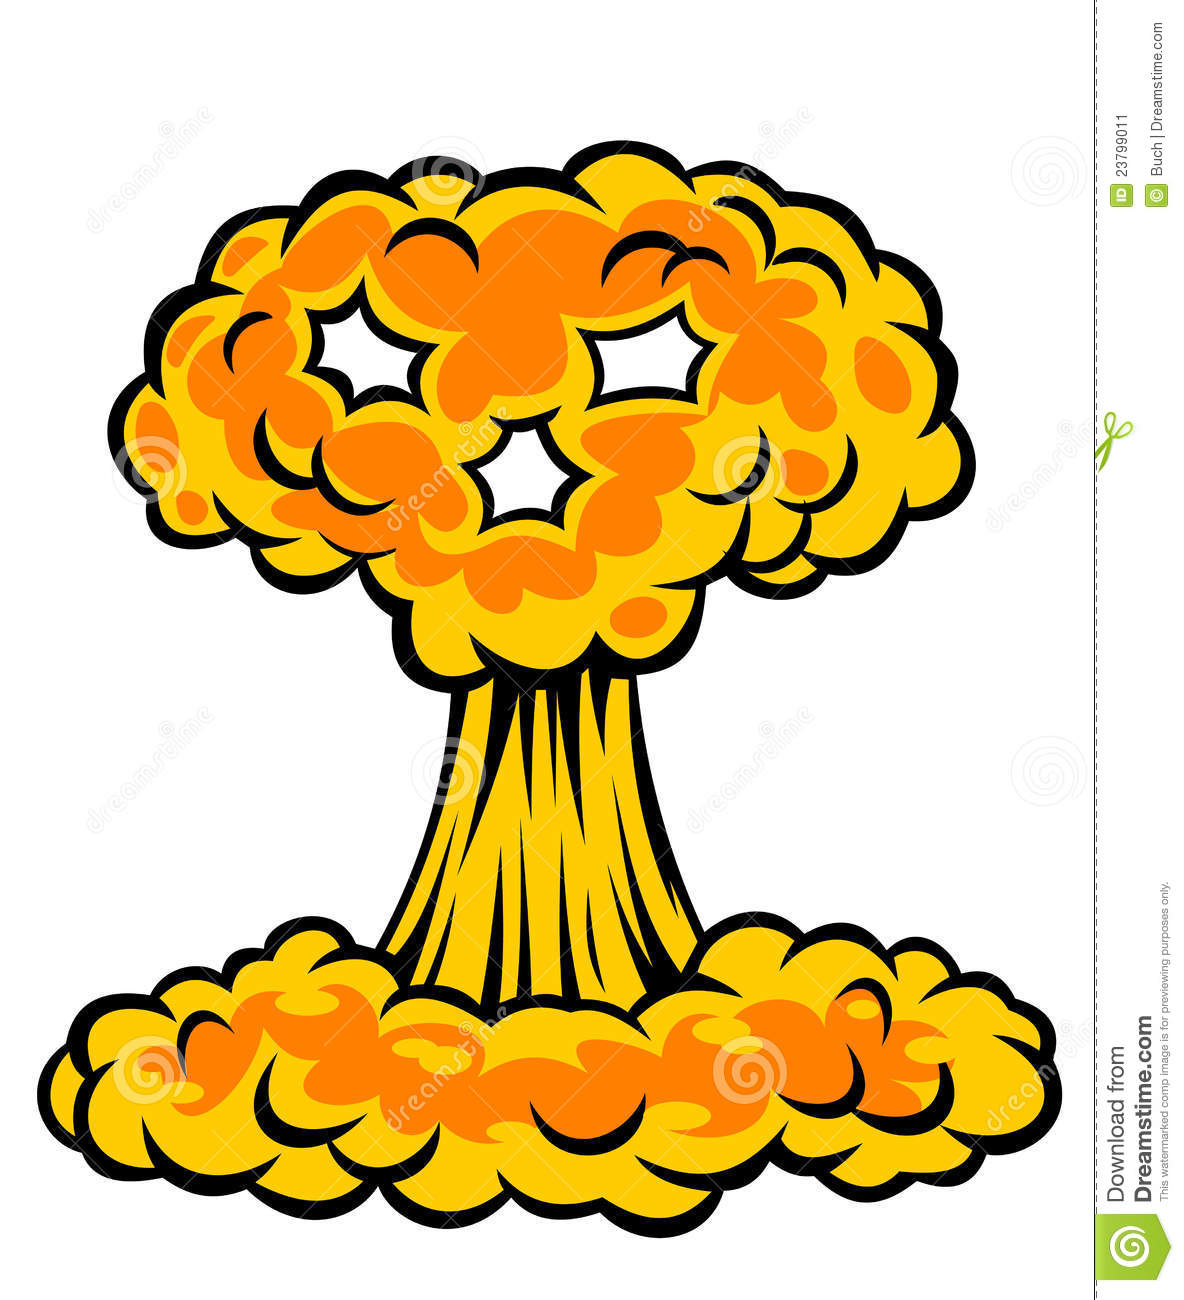 Displaying  16  Gallery Images For Nuclear Mushroom Cloud Clip Art